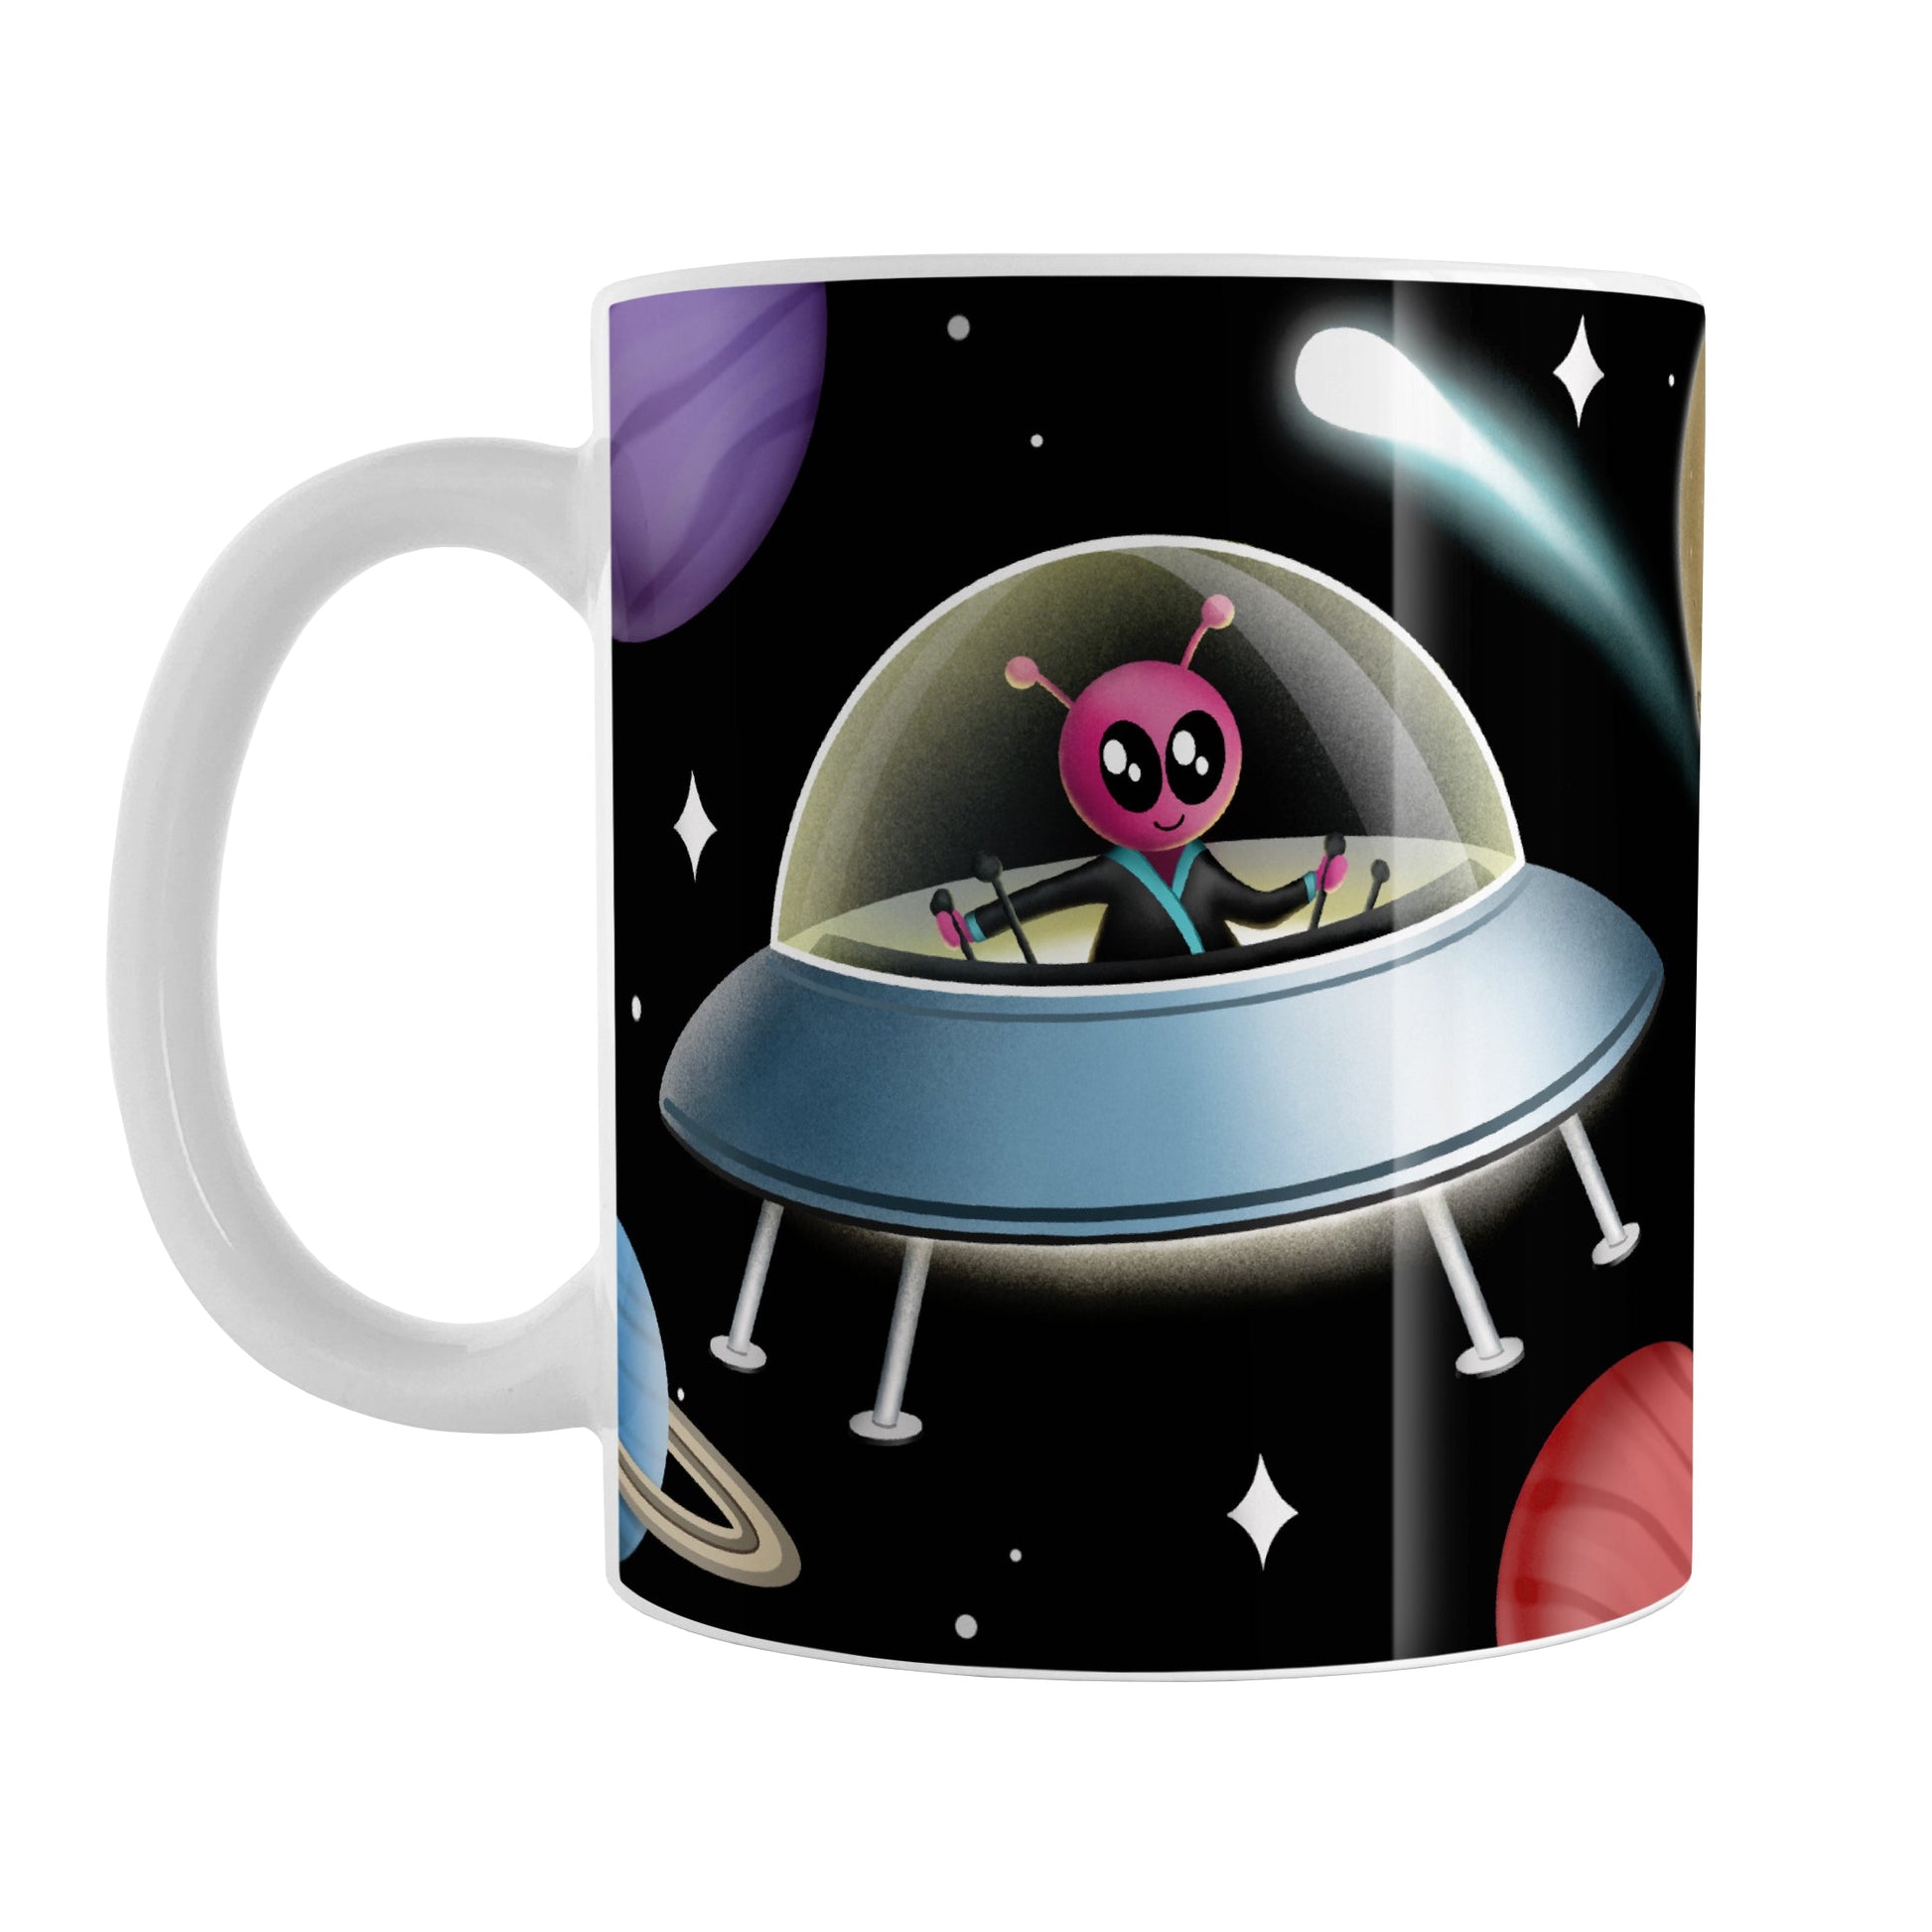 Galaxy Pink Alien Spaceship Mug (11oz) at Amy's Coffee Mugs. A galaxy spaceship mug designed with an illustration of a pink alien in a spaceship in a galaxy design with planets, stars, comets, and a moon over a black background.